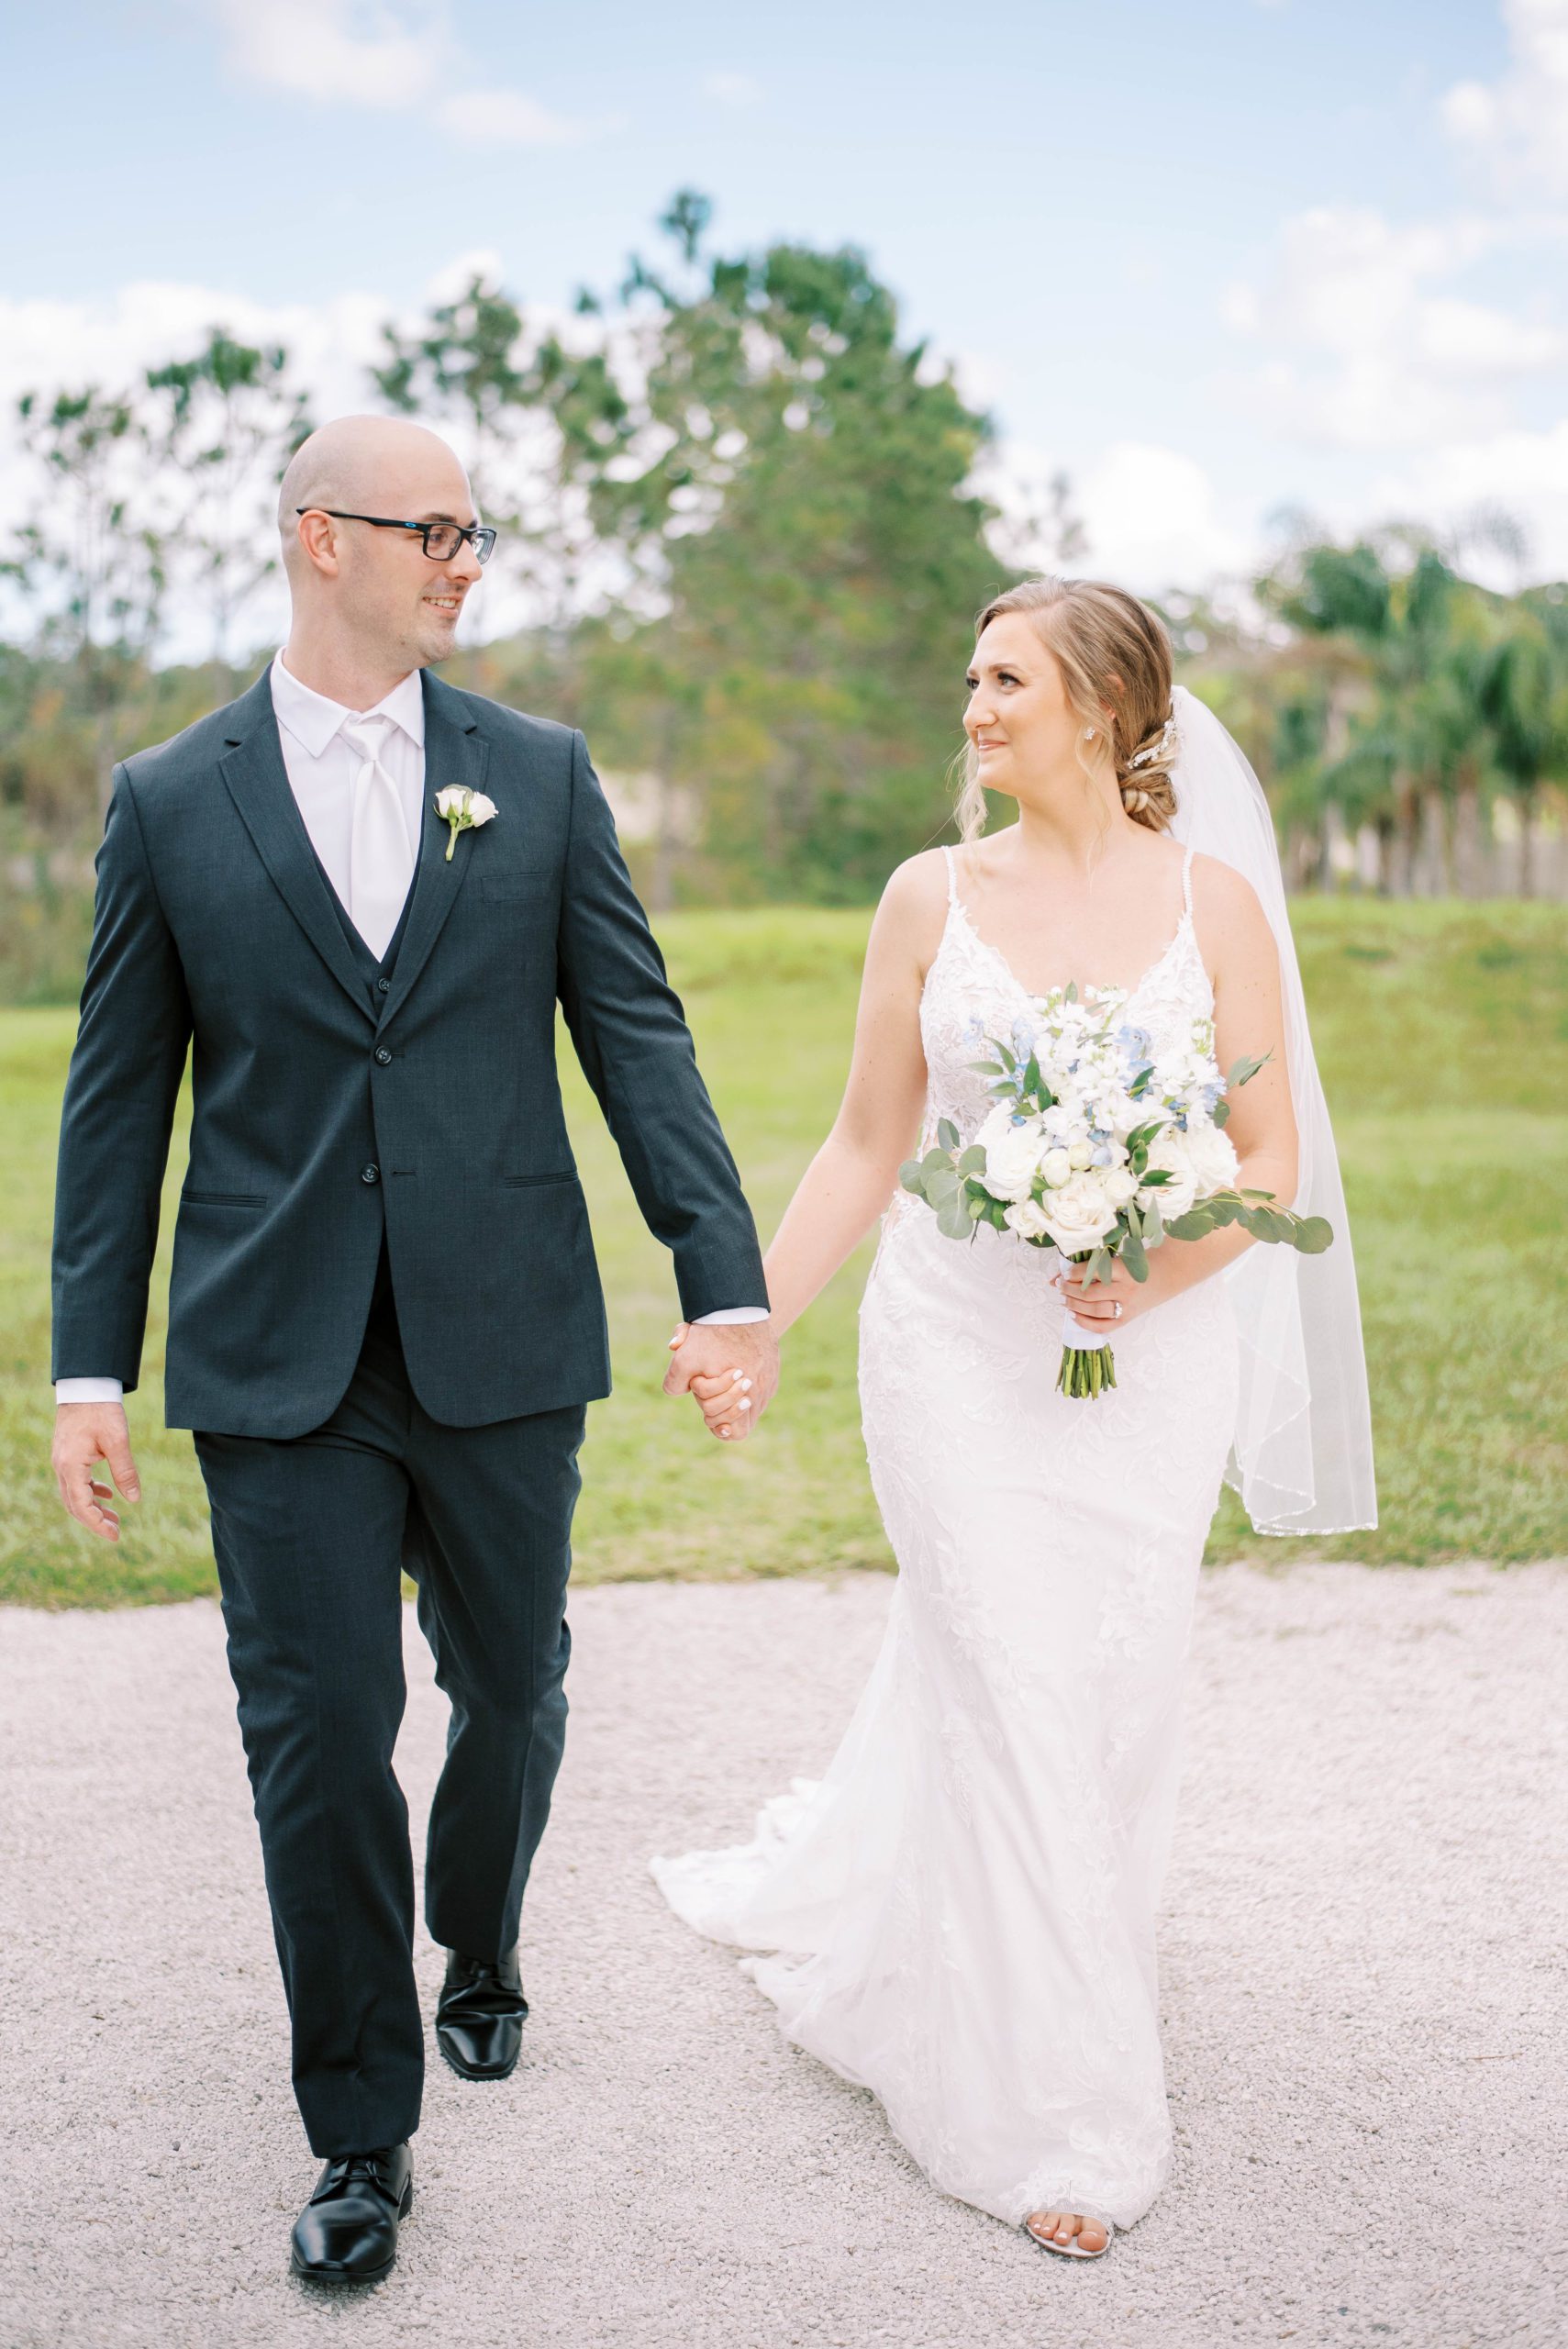 The Barn at Lone oak acres wedding Tampa wedding bride and groom walking holding hands and smiling